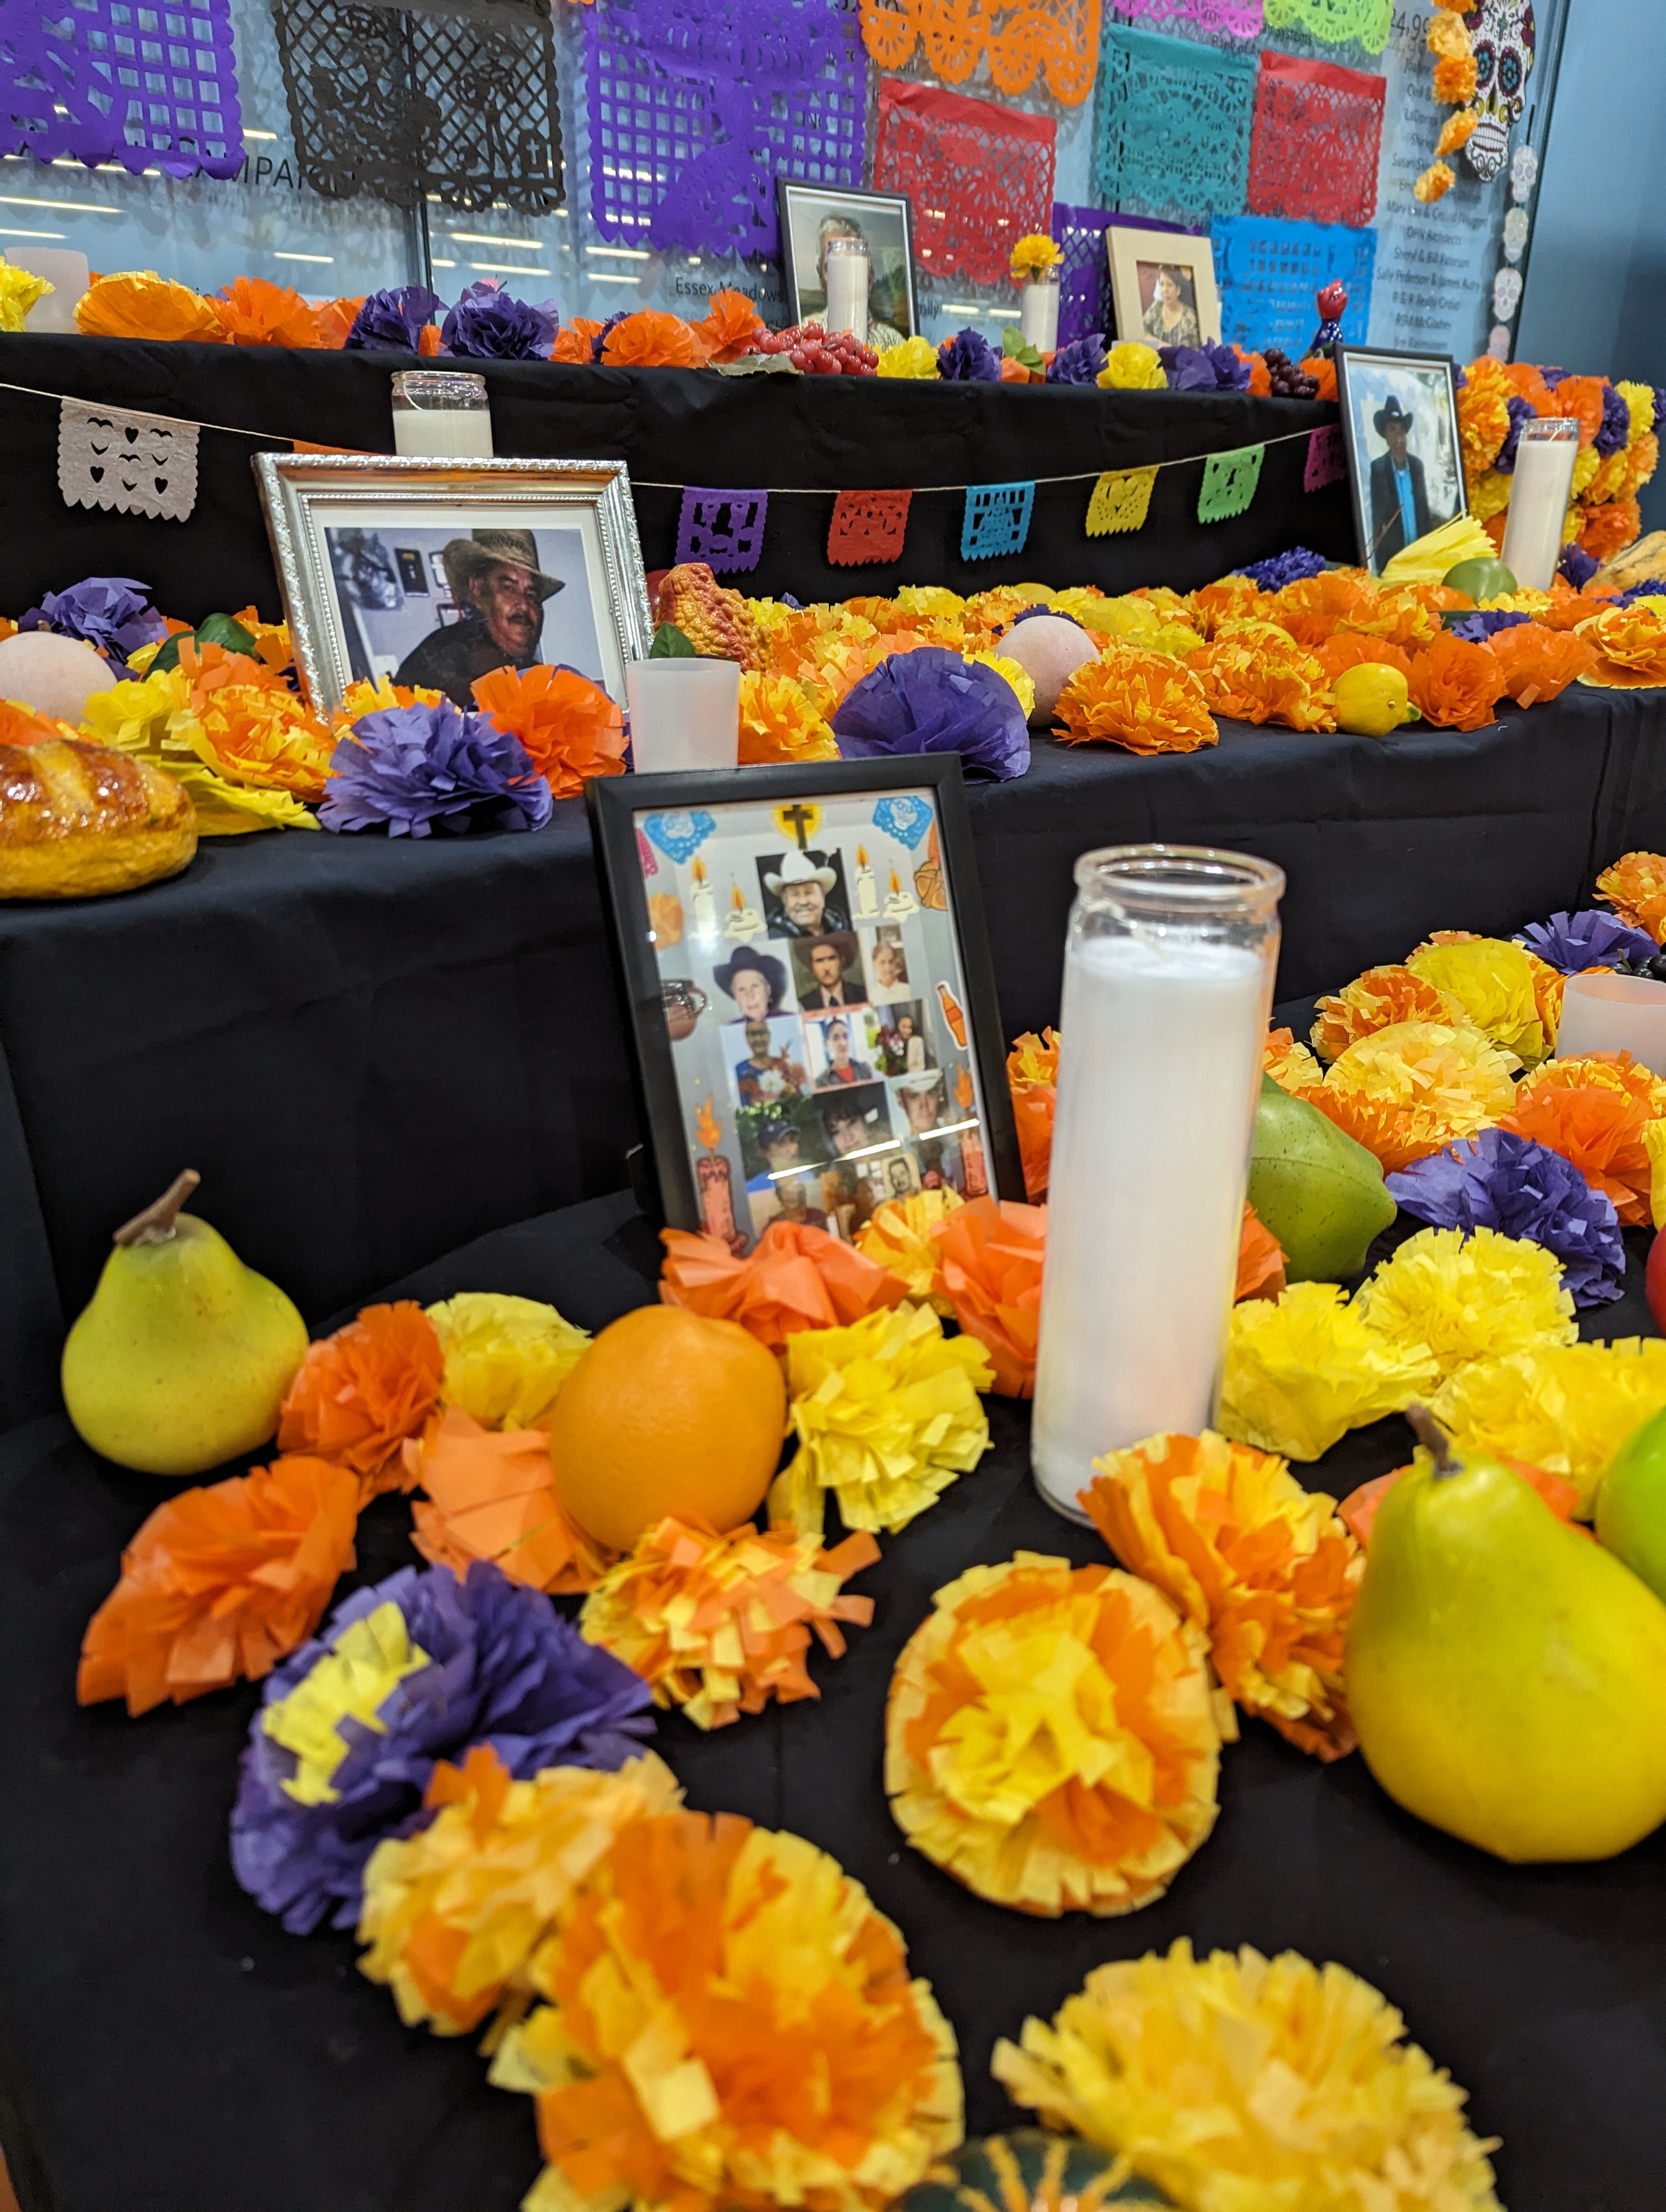 Ofrenda with paper marigolds, cut paper, photographs, candles, and food